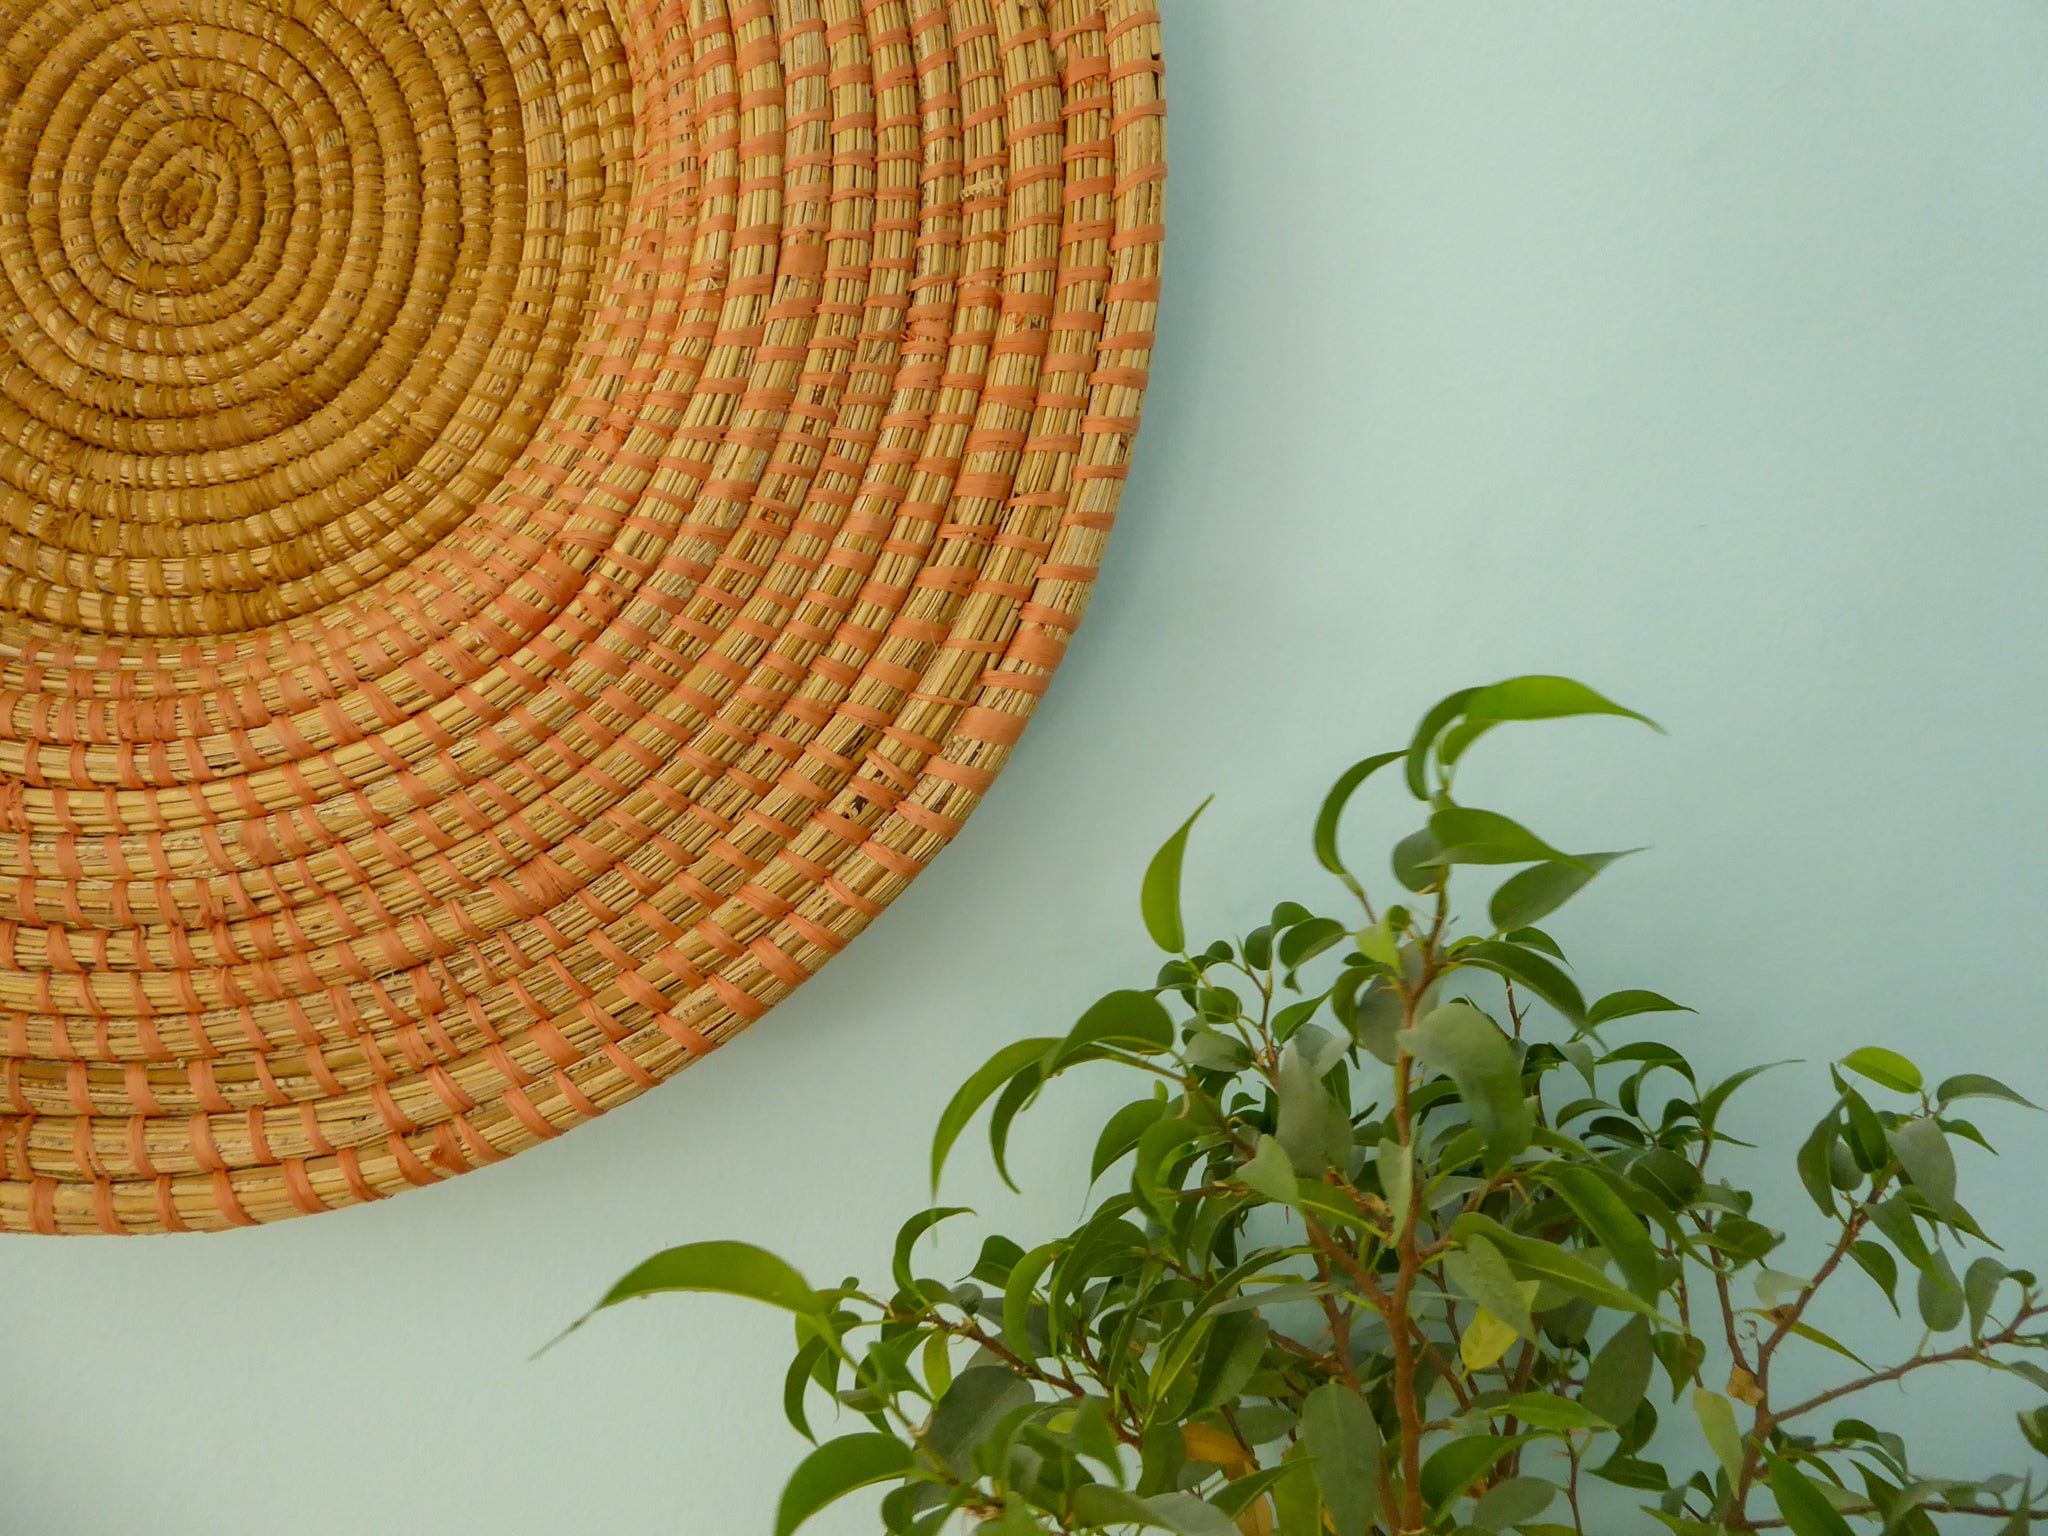 Natural woven african wall plate on blue wall with green plant